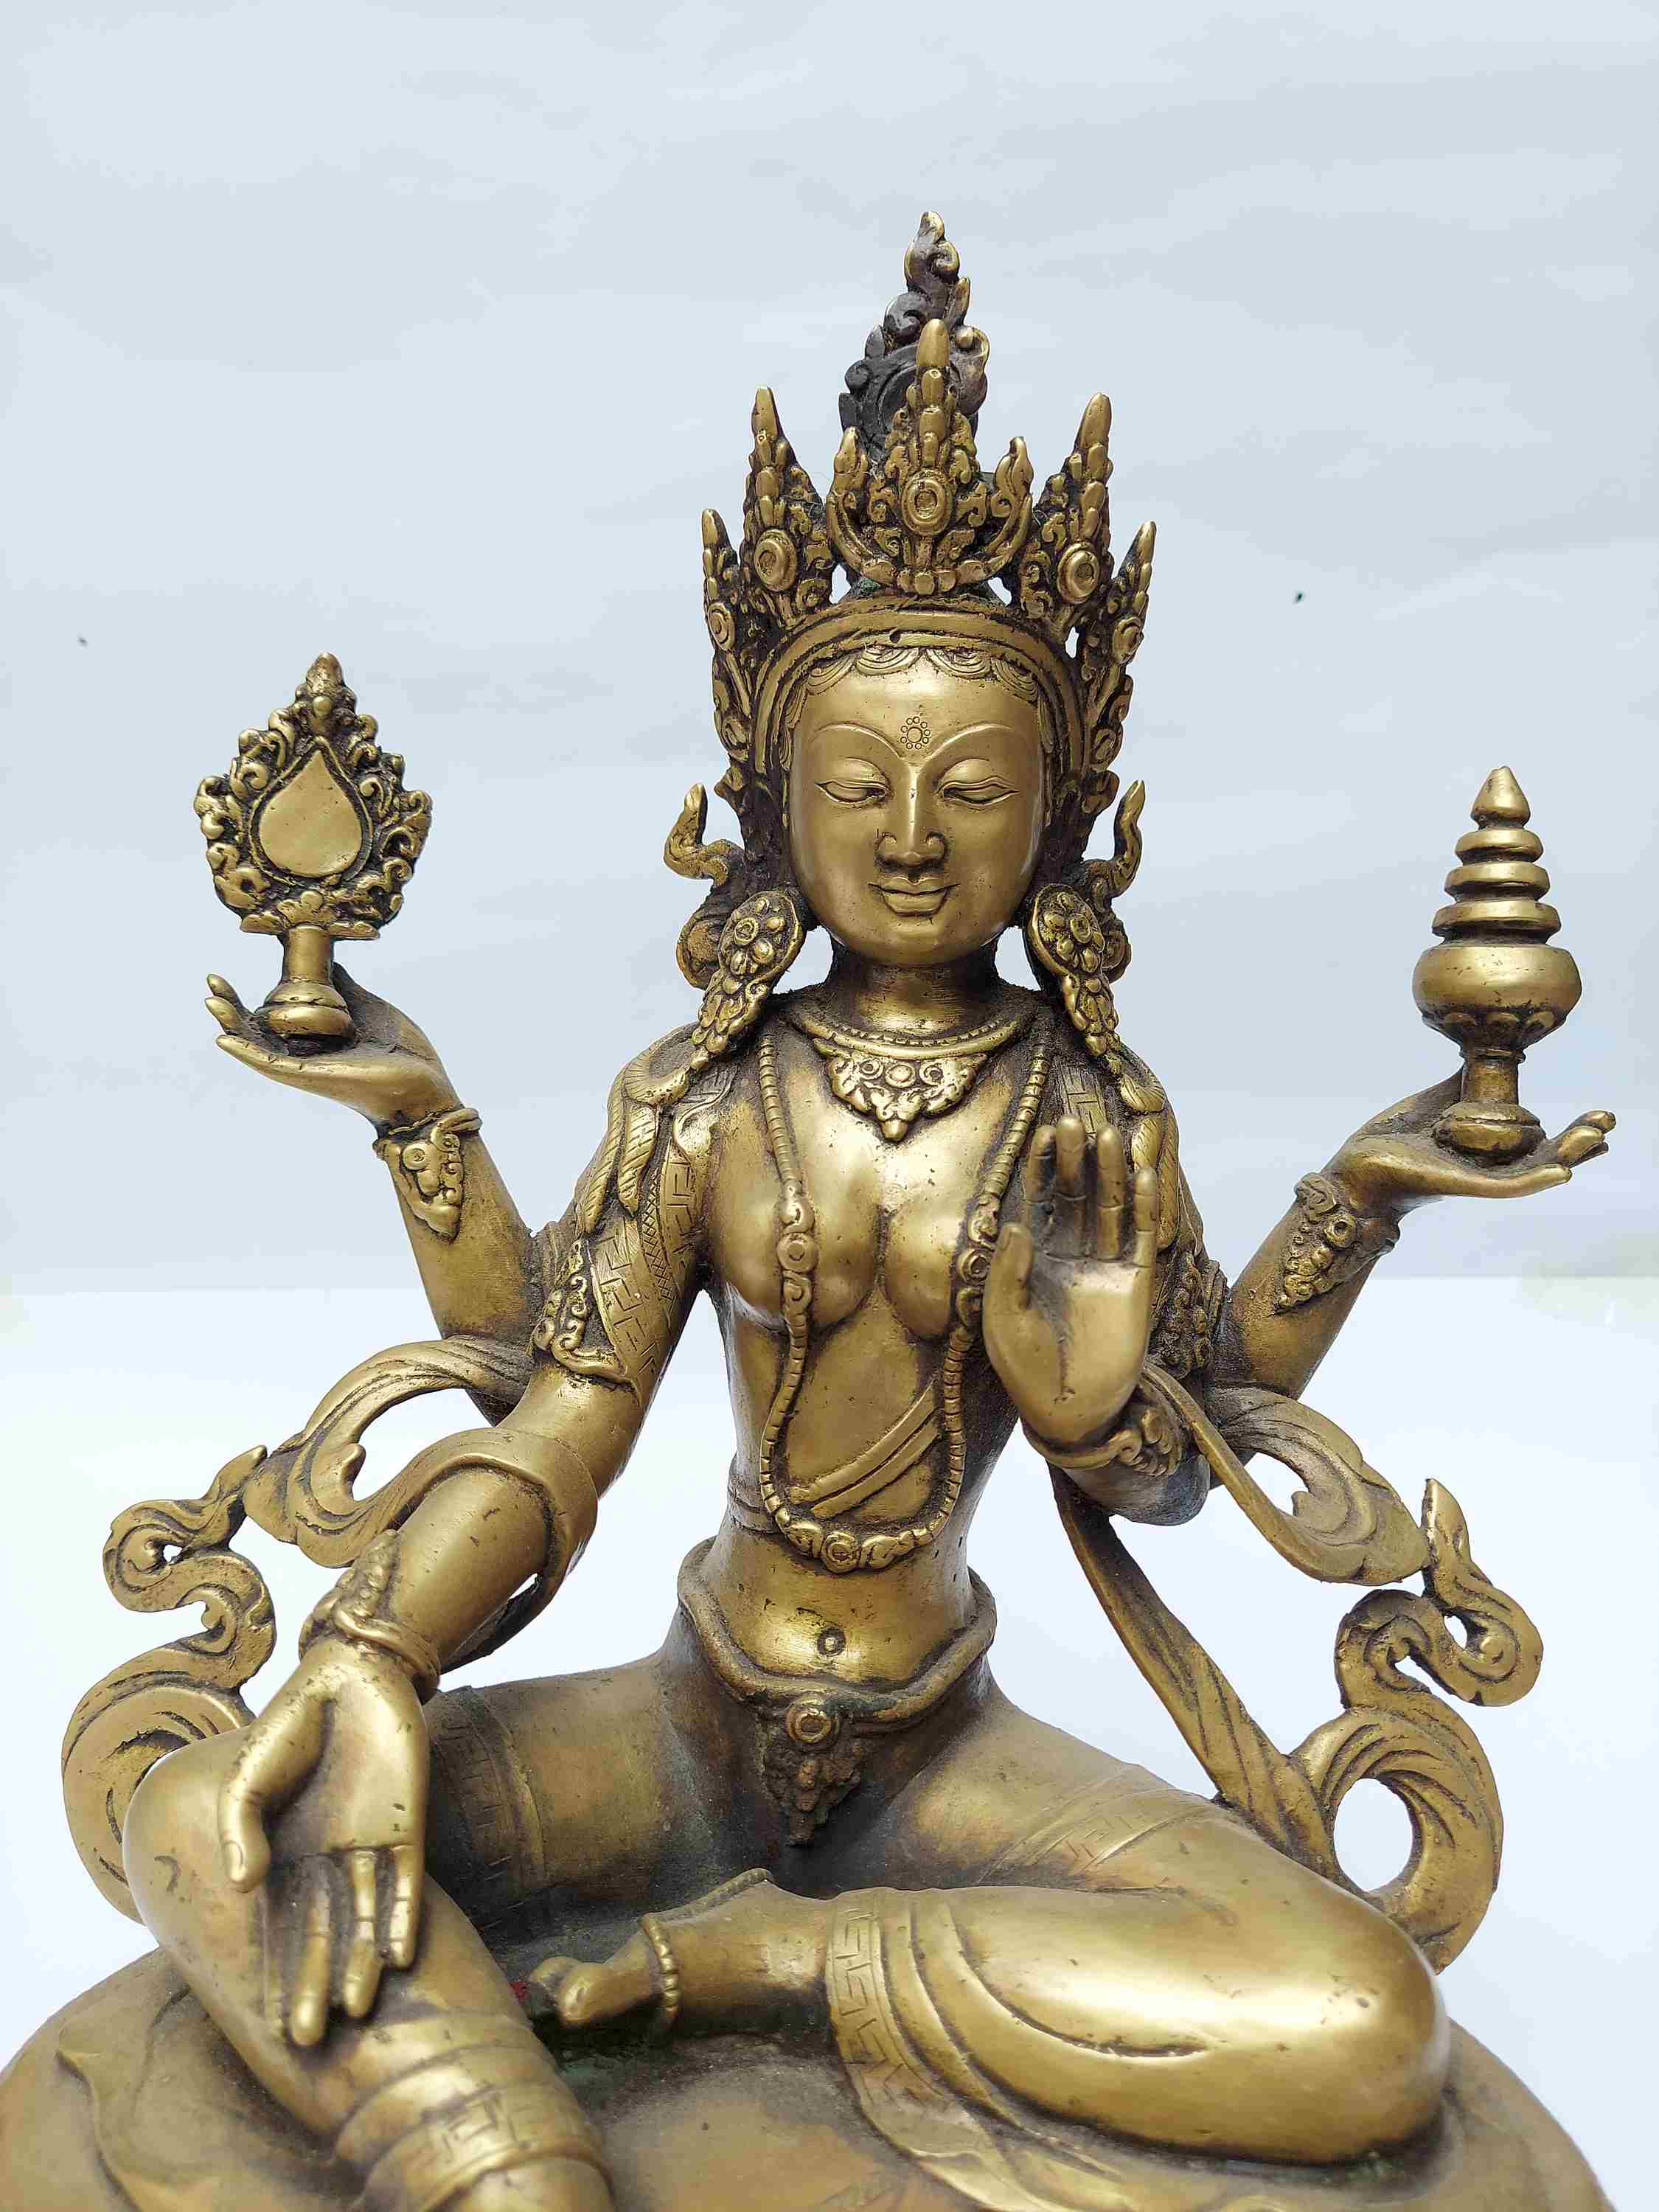 unique Brass From Bhaktapur, Buddhist Handmade Statue Of Lakshmi, full Gold Plated, Stone Setting, Face Painted